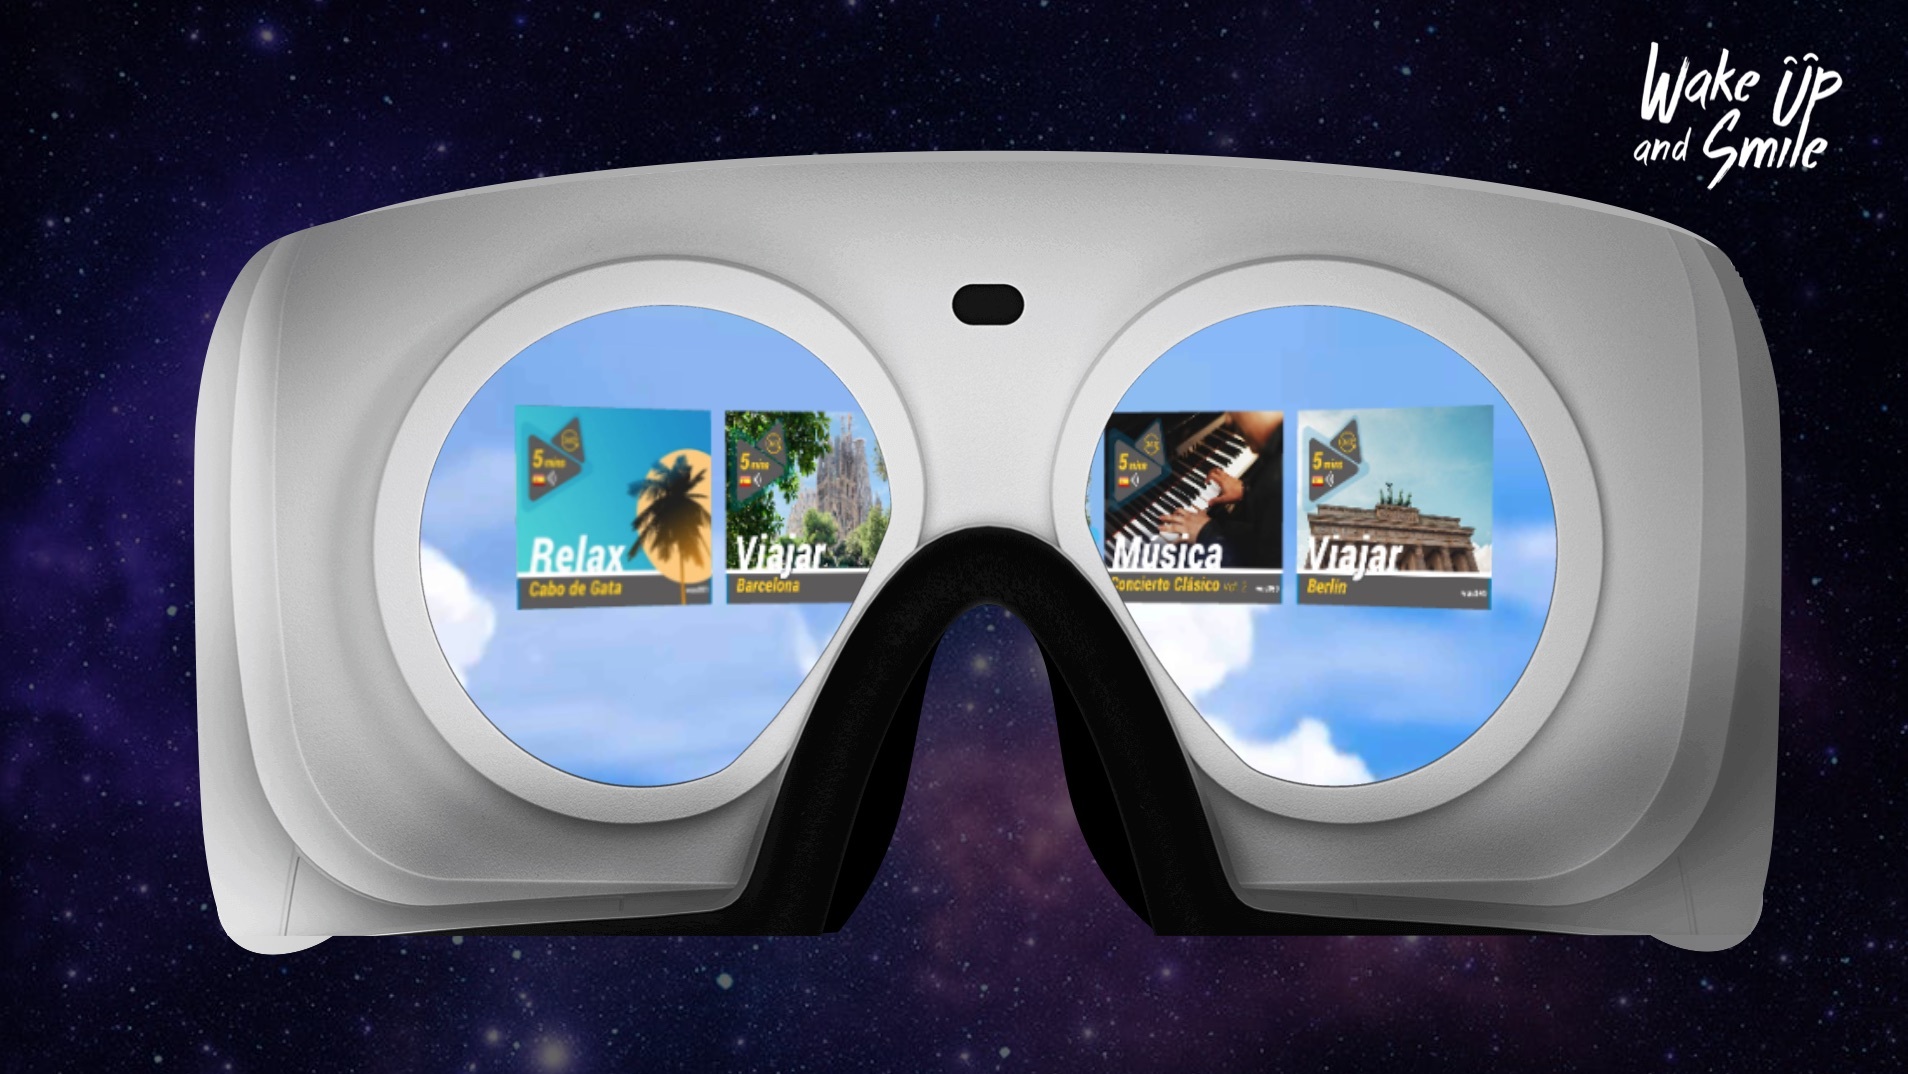 Image showing an example of the menus that can be displayed on the VR headset.